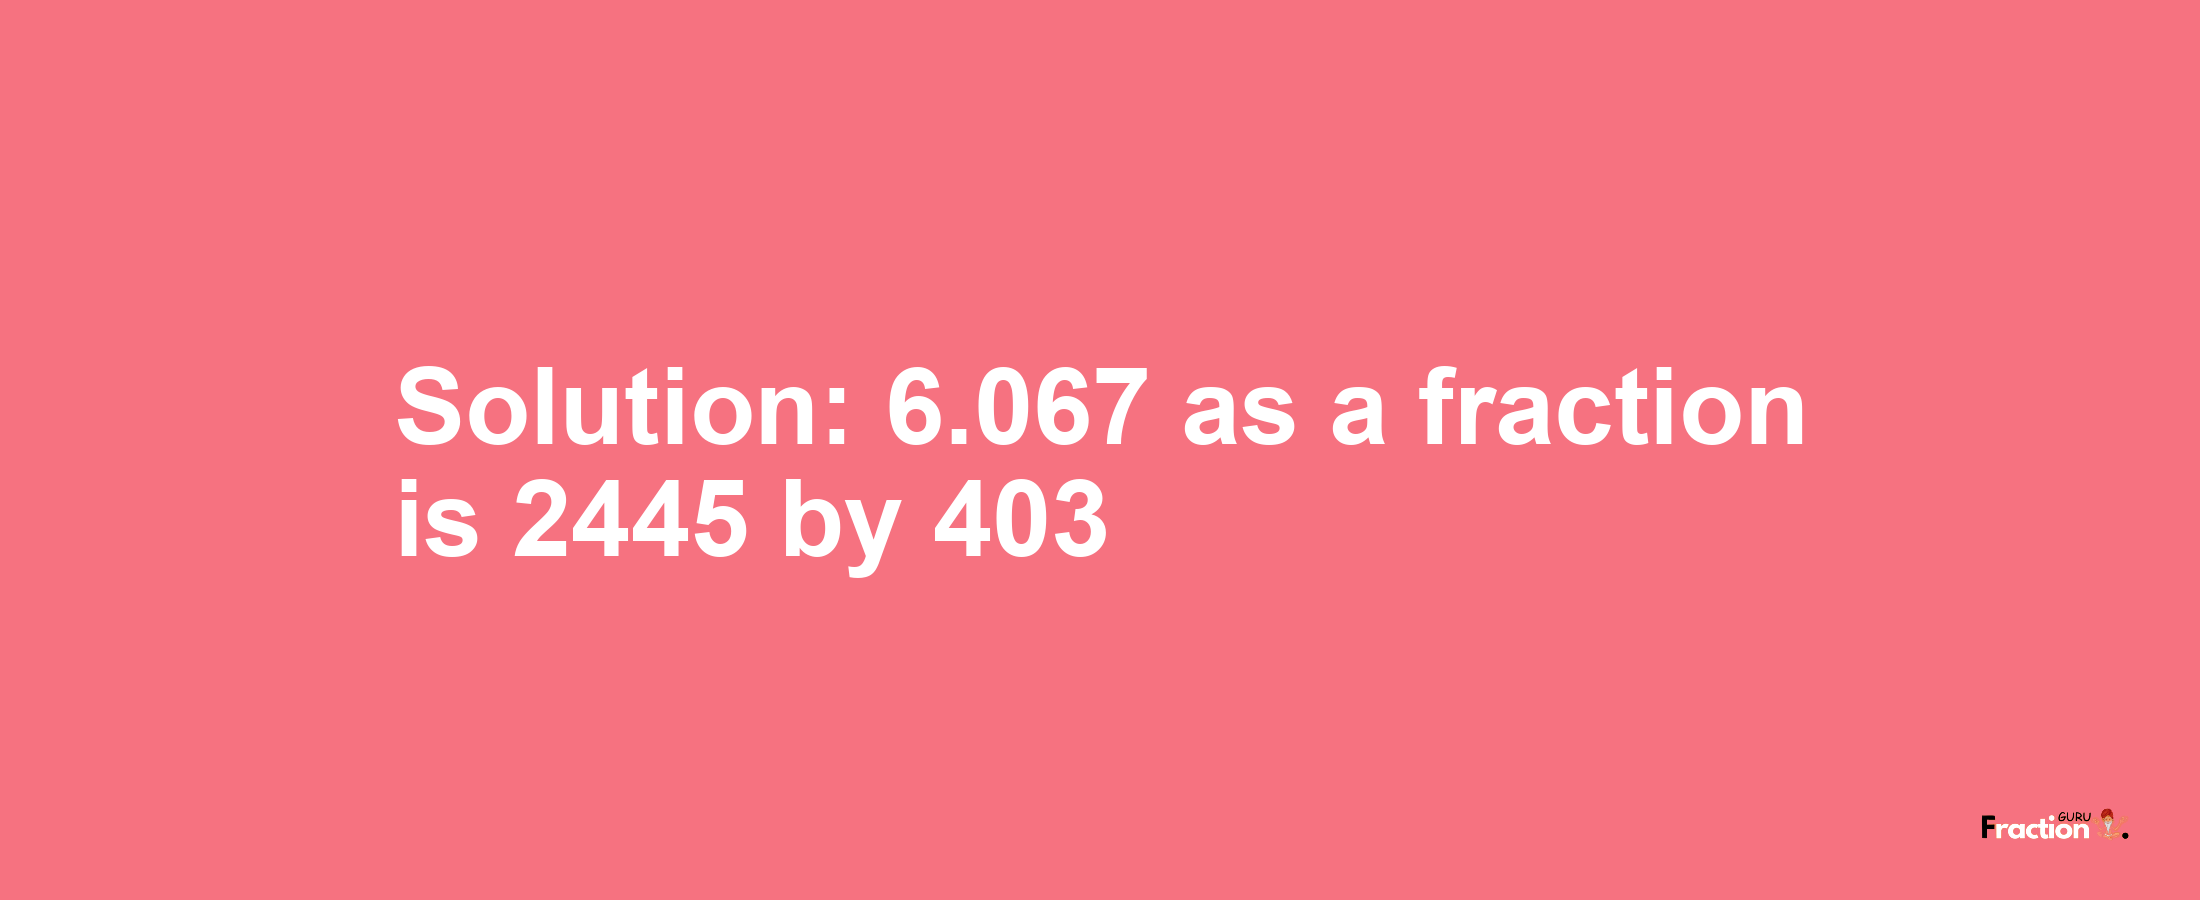 Solution:6.067 as a fraction is 2445/403